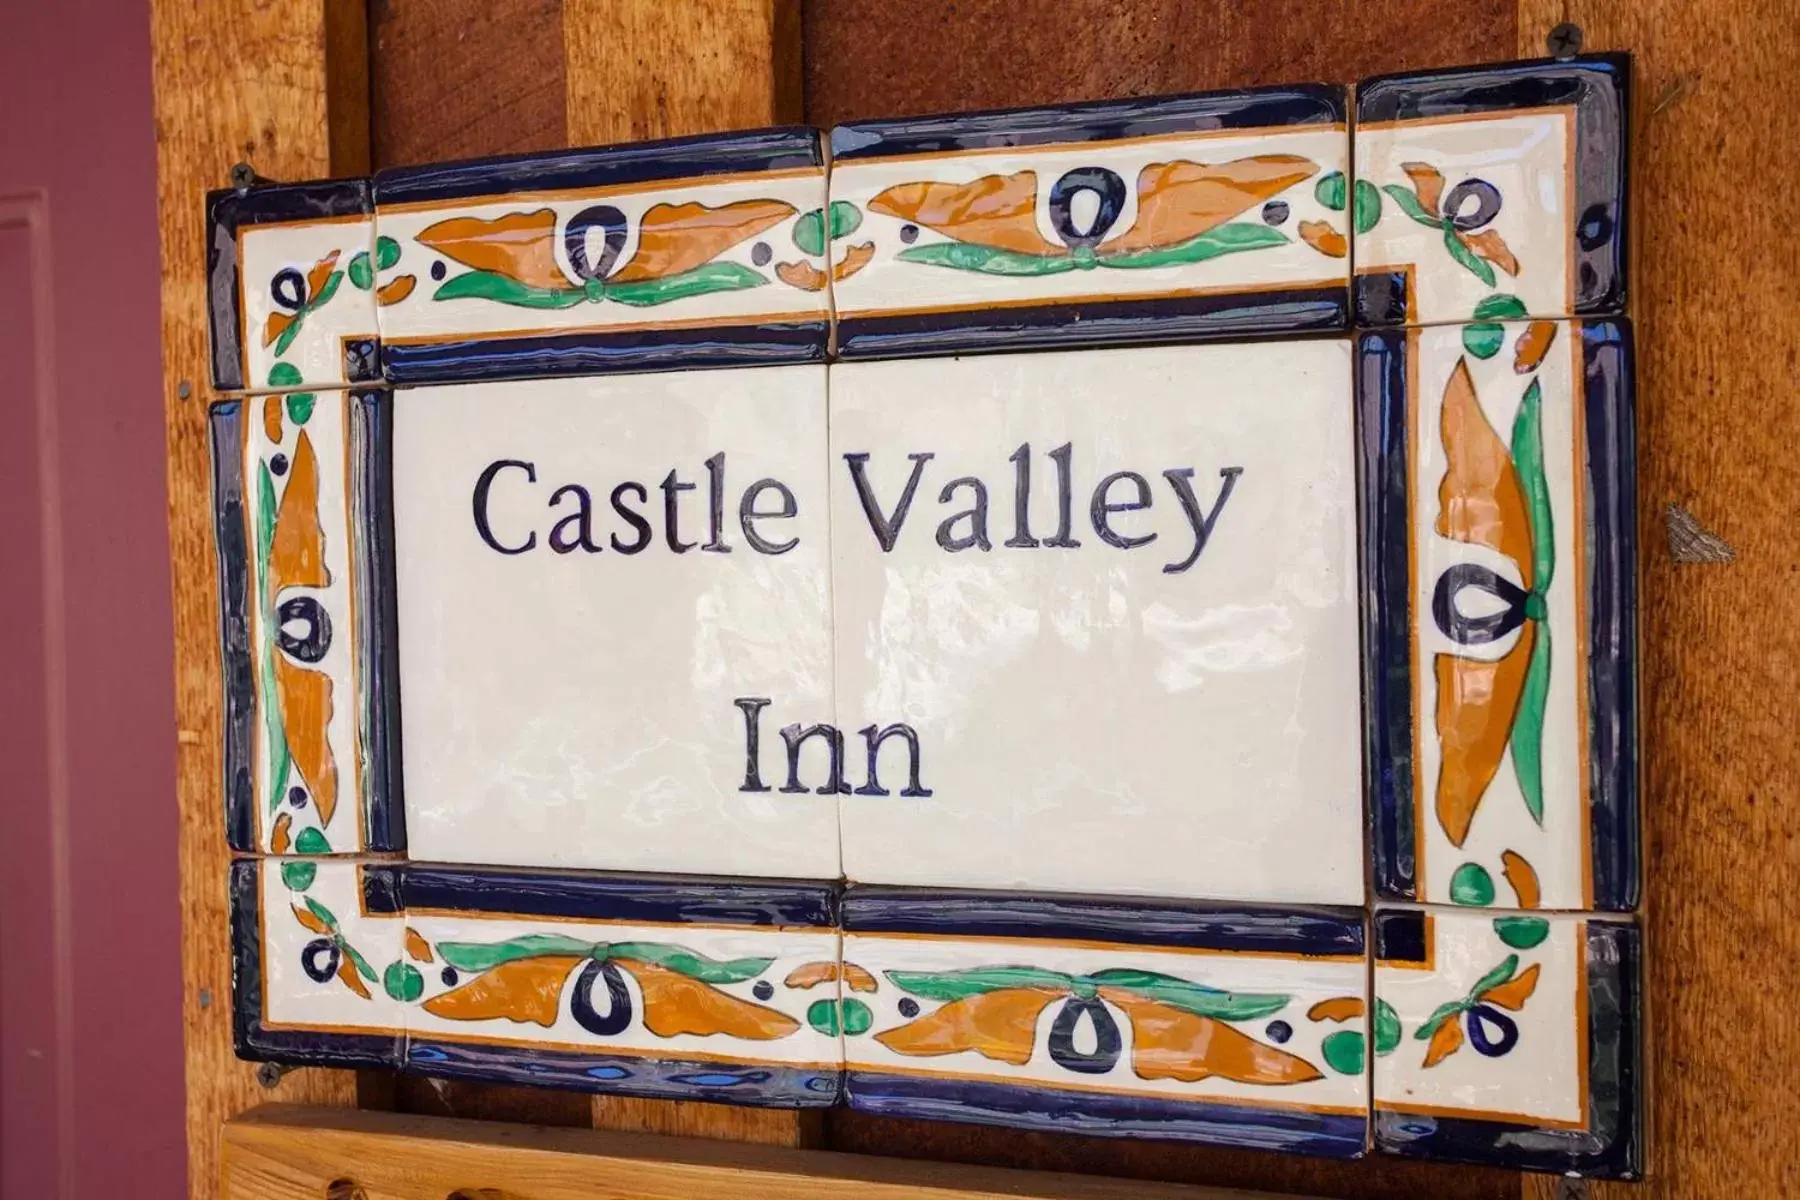 Property logo or sign in Castle Valley Inn